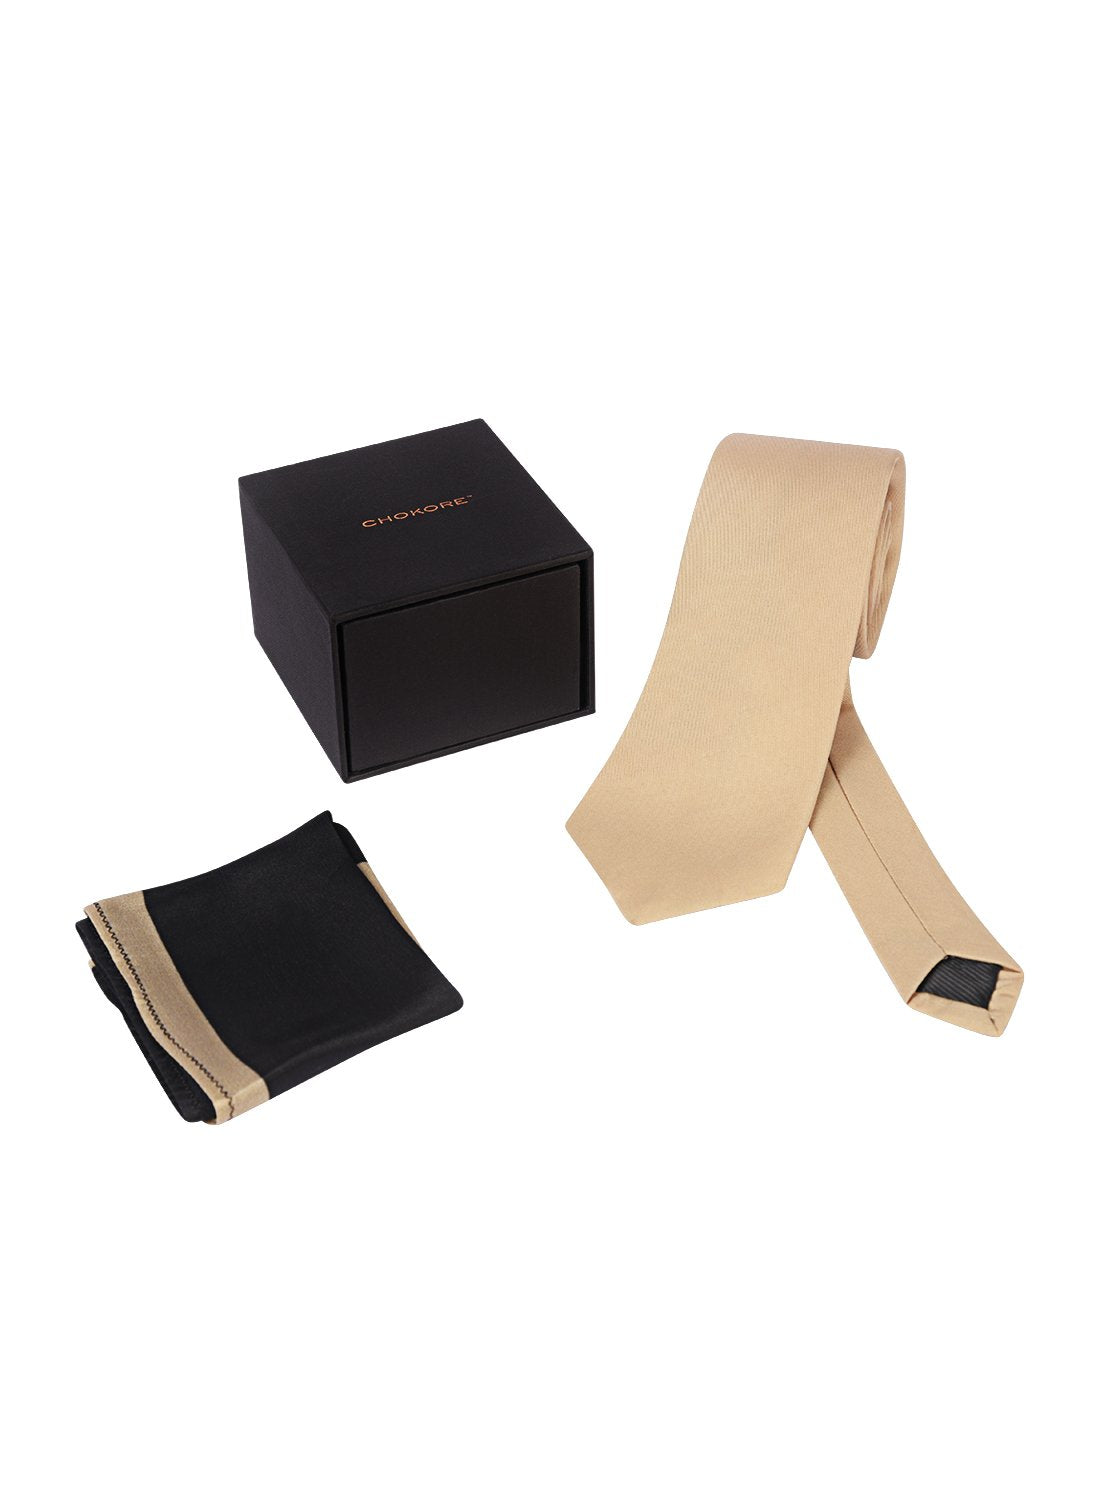 Chokore Beige color silk tie & Two-in-one Beige & Black Silk Pocket Square from the Solids Line set